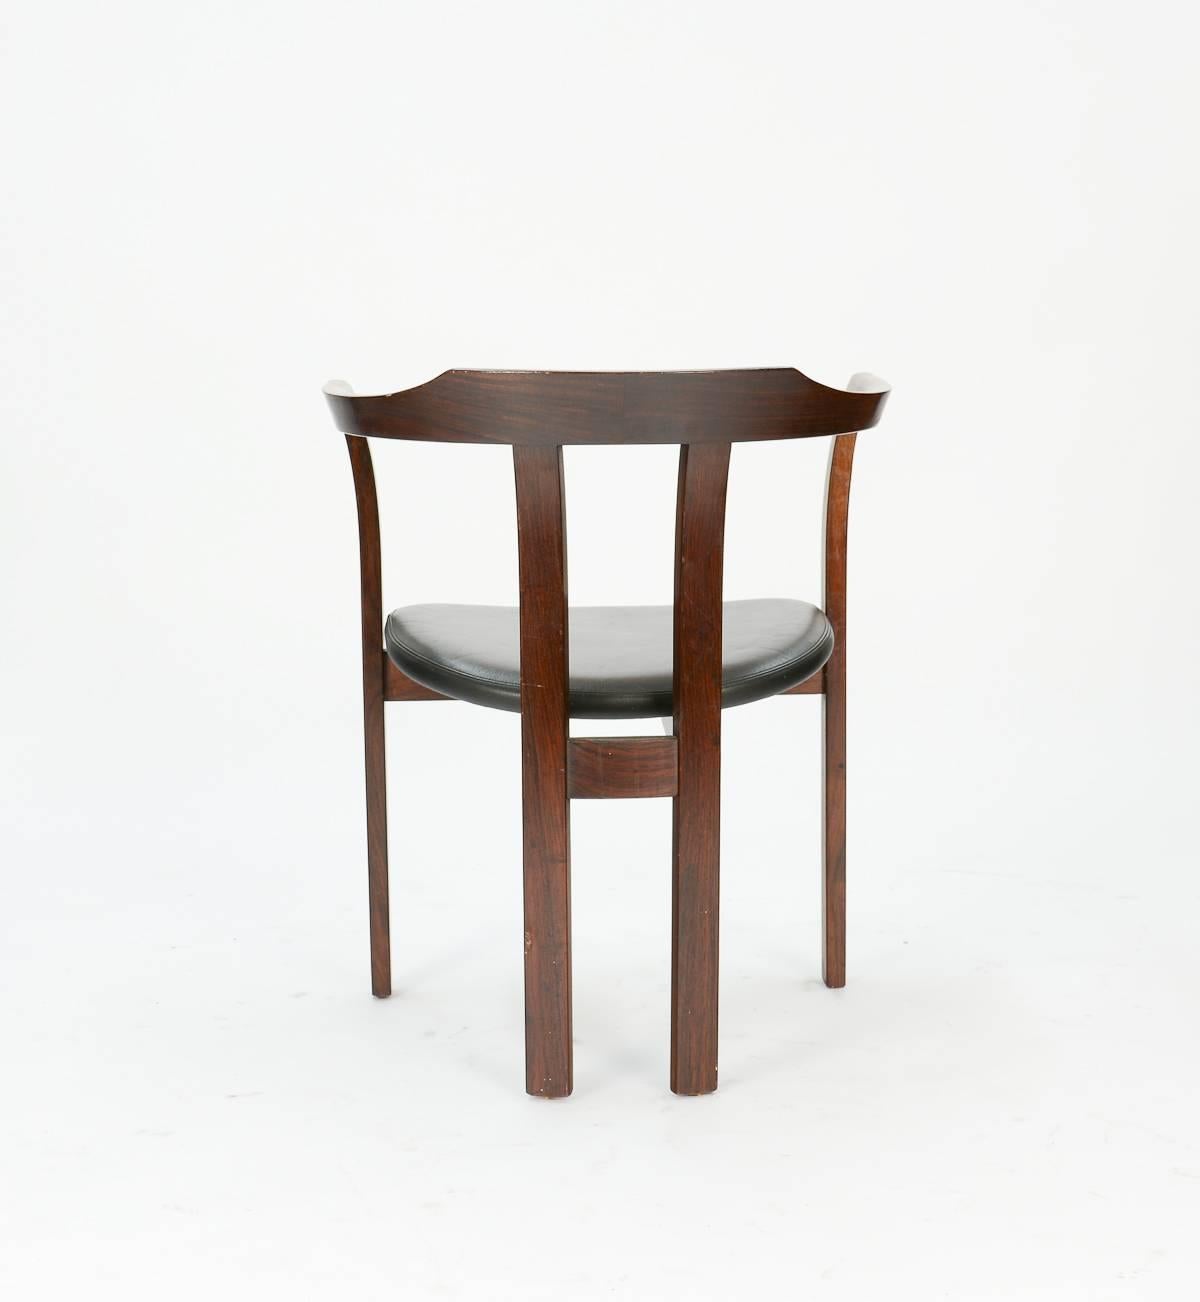 Danish A Pair Rosewood Arm Chairs by Hans Olsen for C/S Mobler, Glostrup 